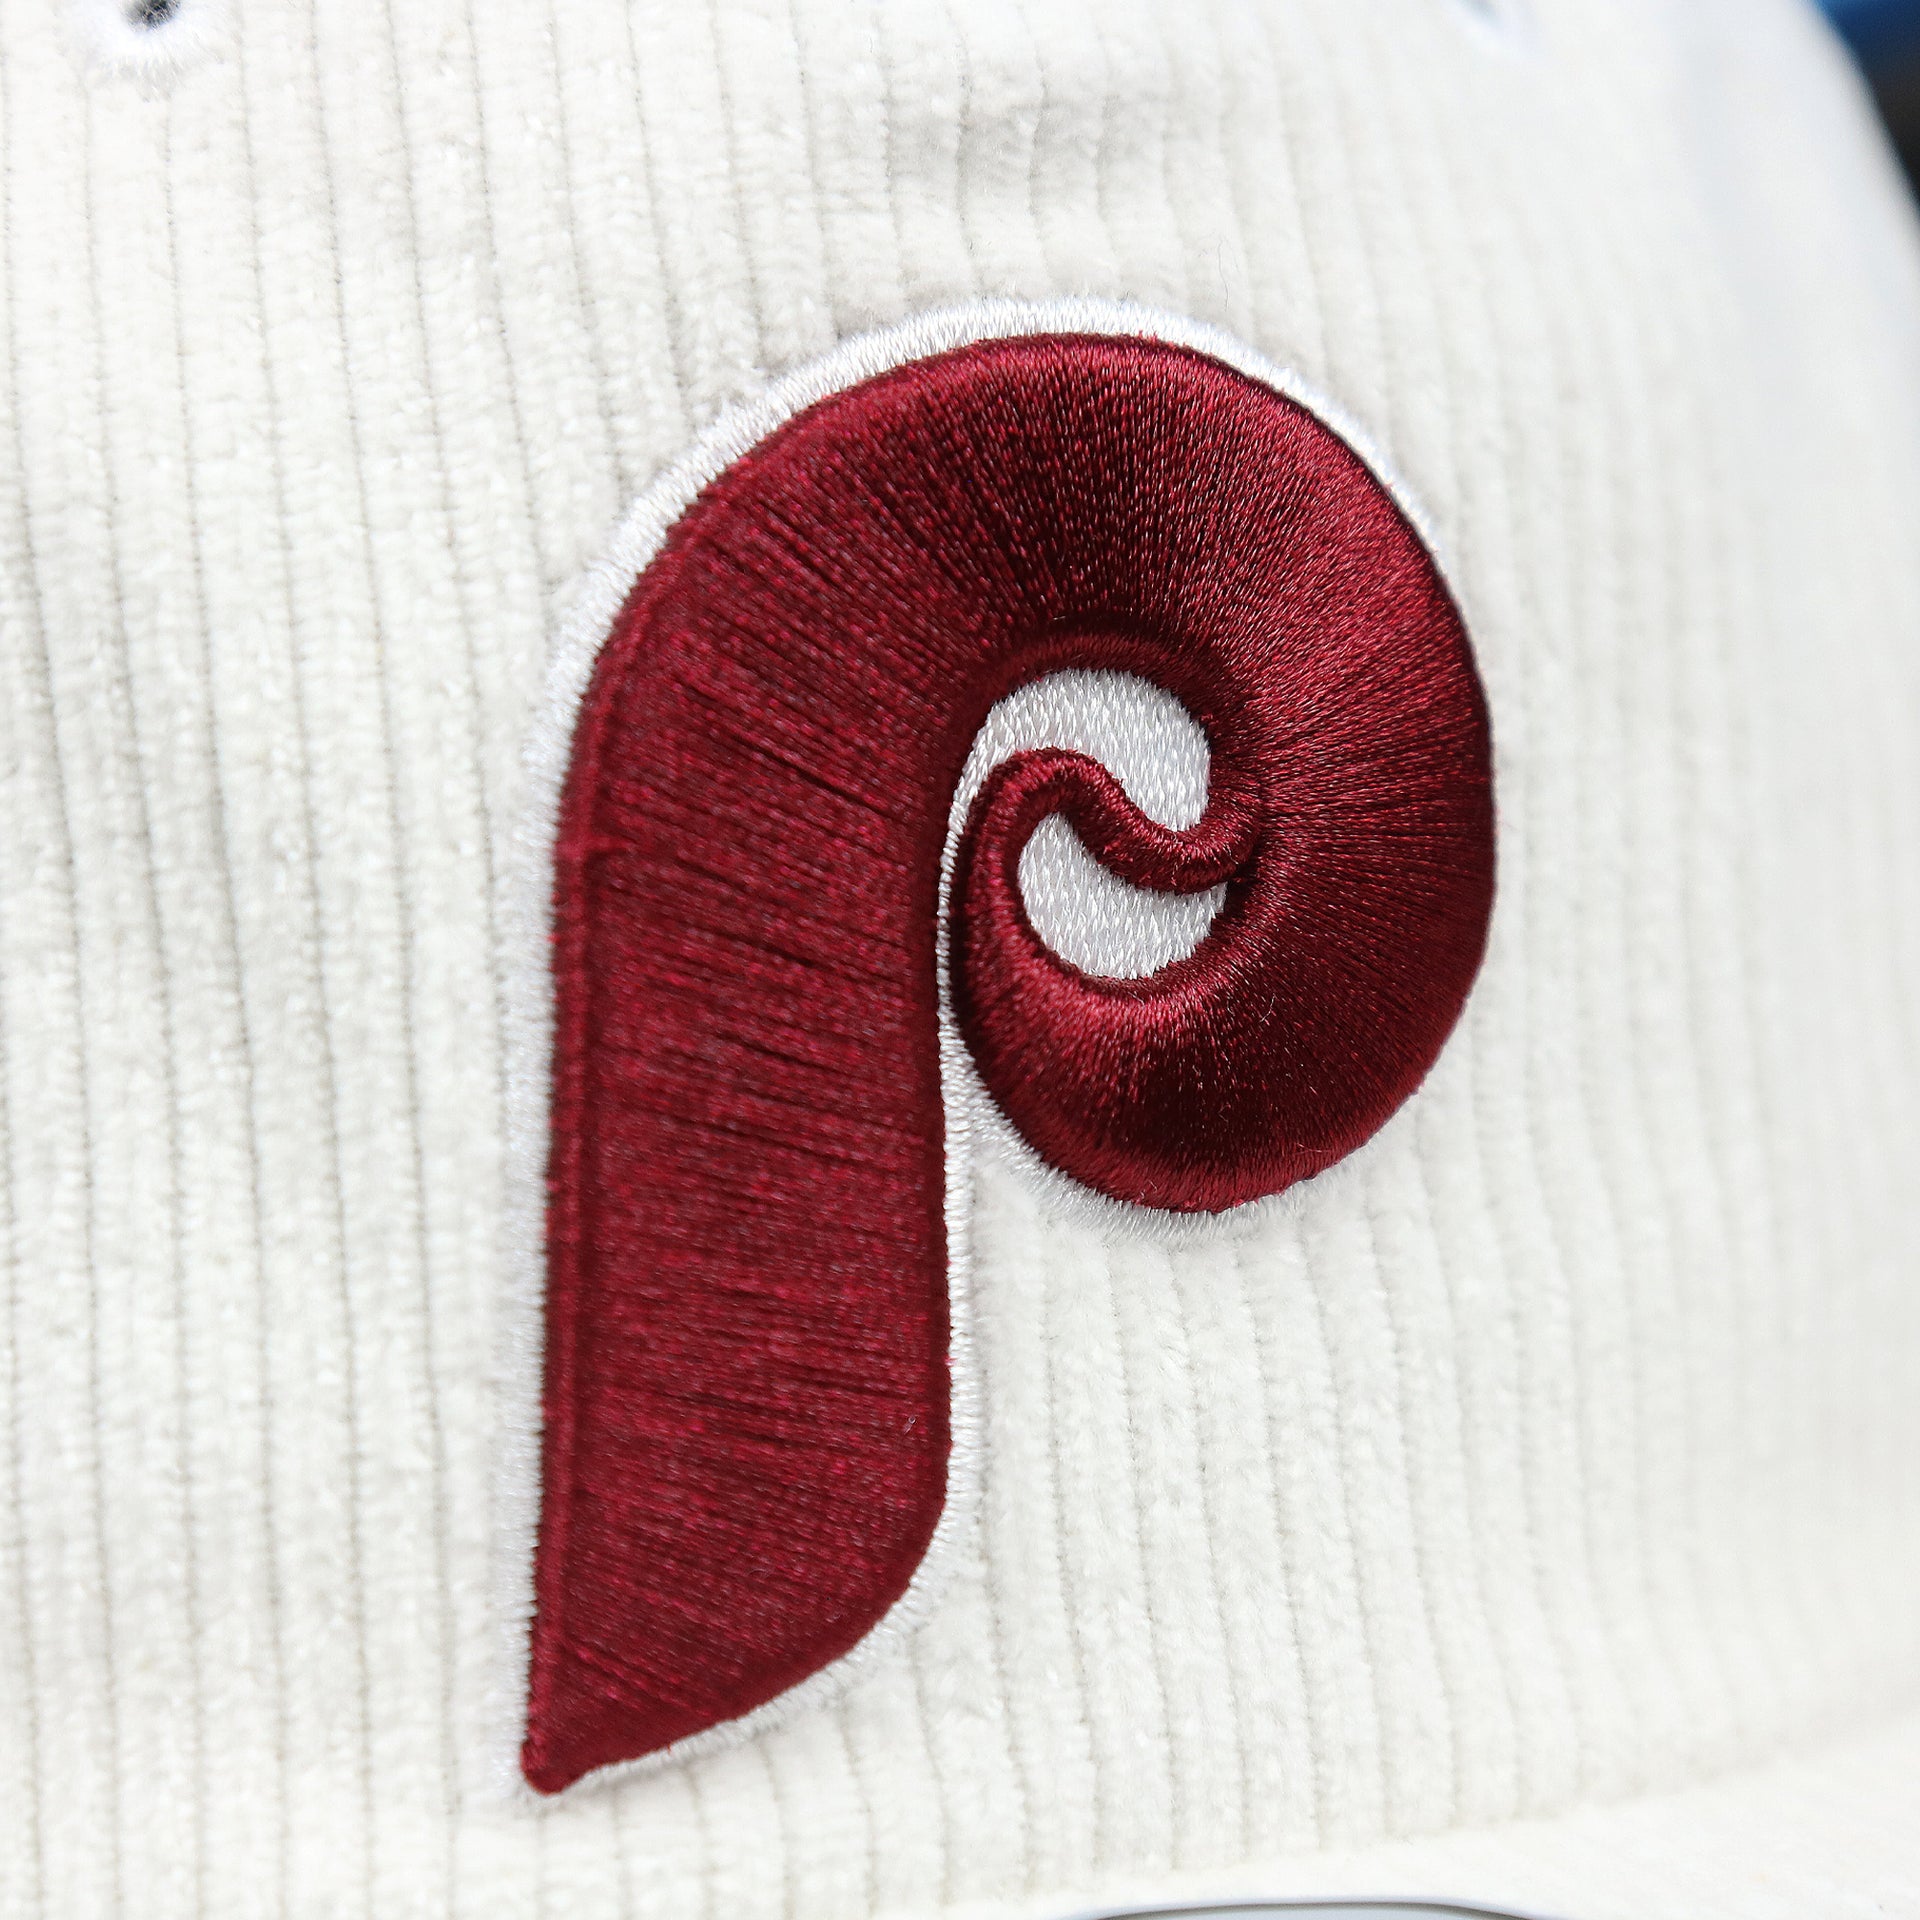 The Cooperstown Phillies Logo on the Cooperstown Philadelphia Phillies Corduroy Snapback Hat | White Corduroy Snap Cap